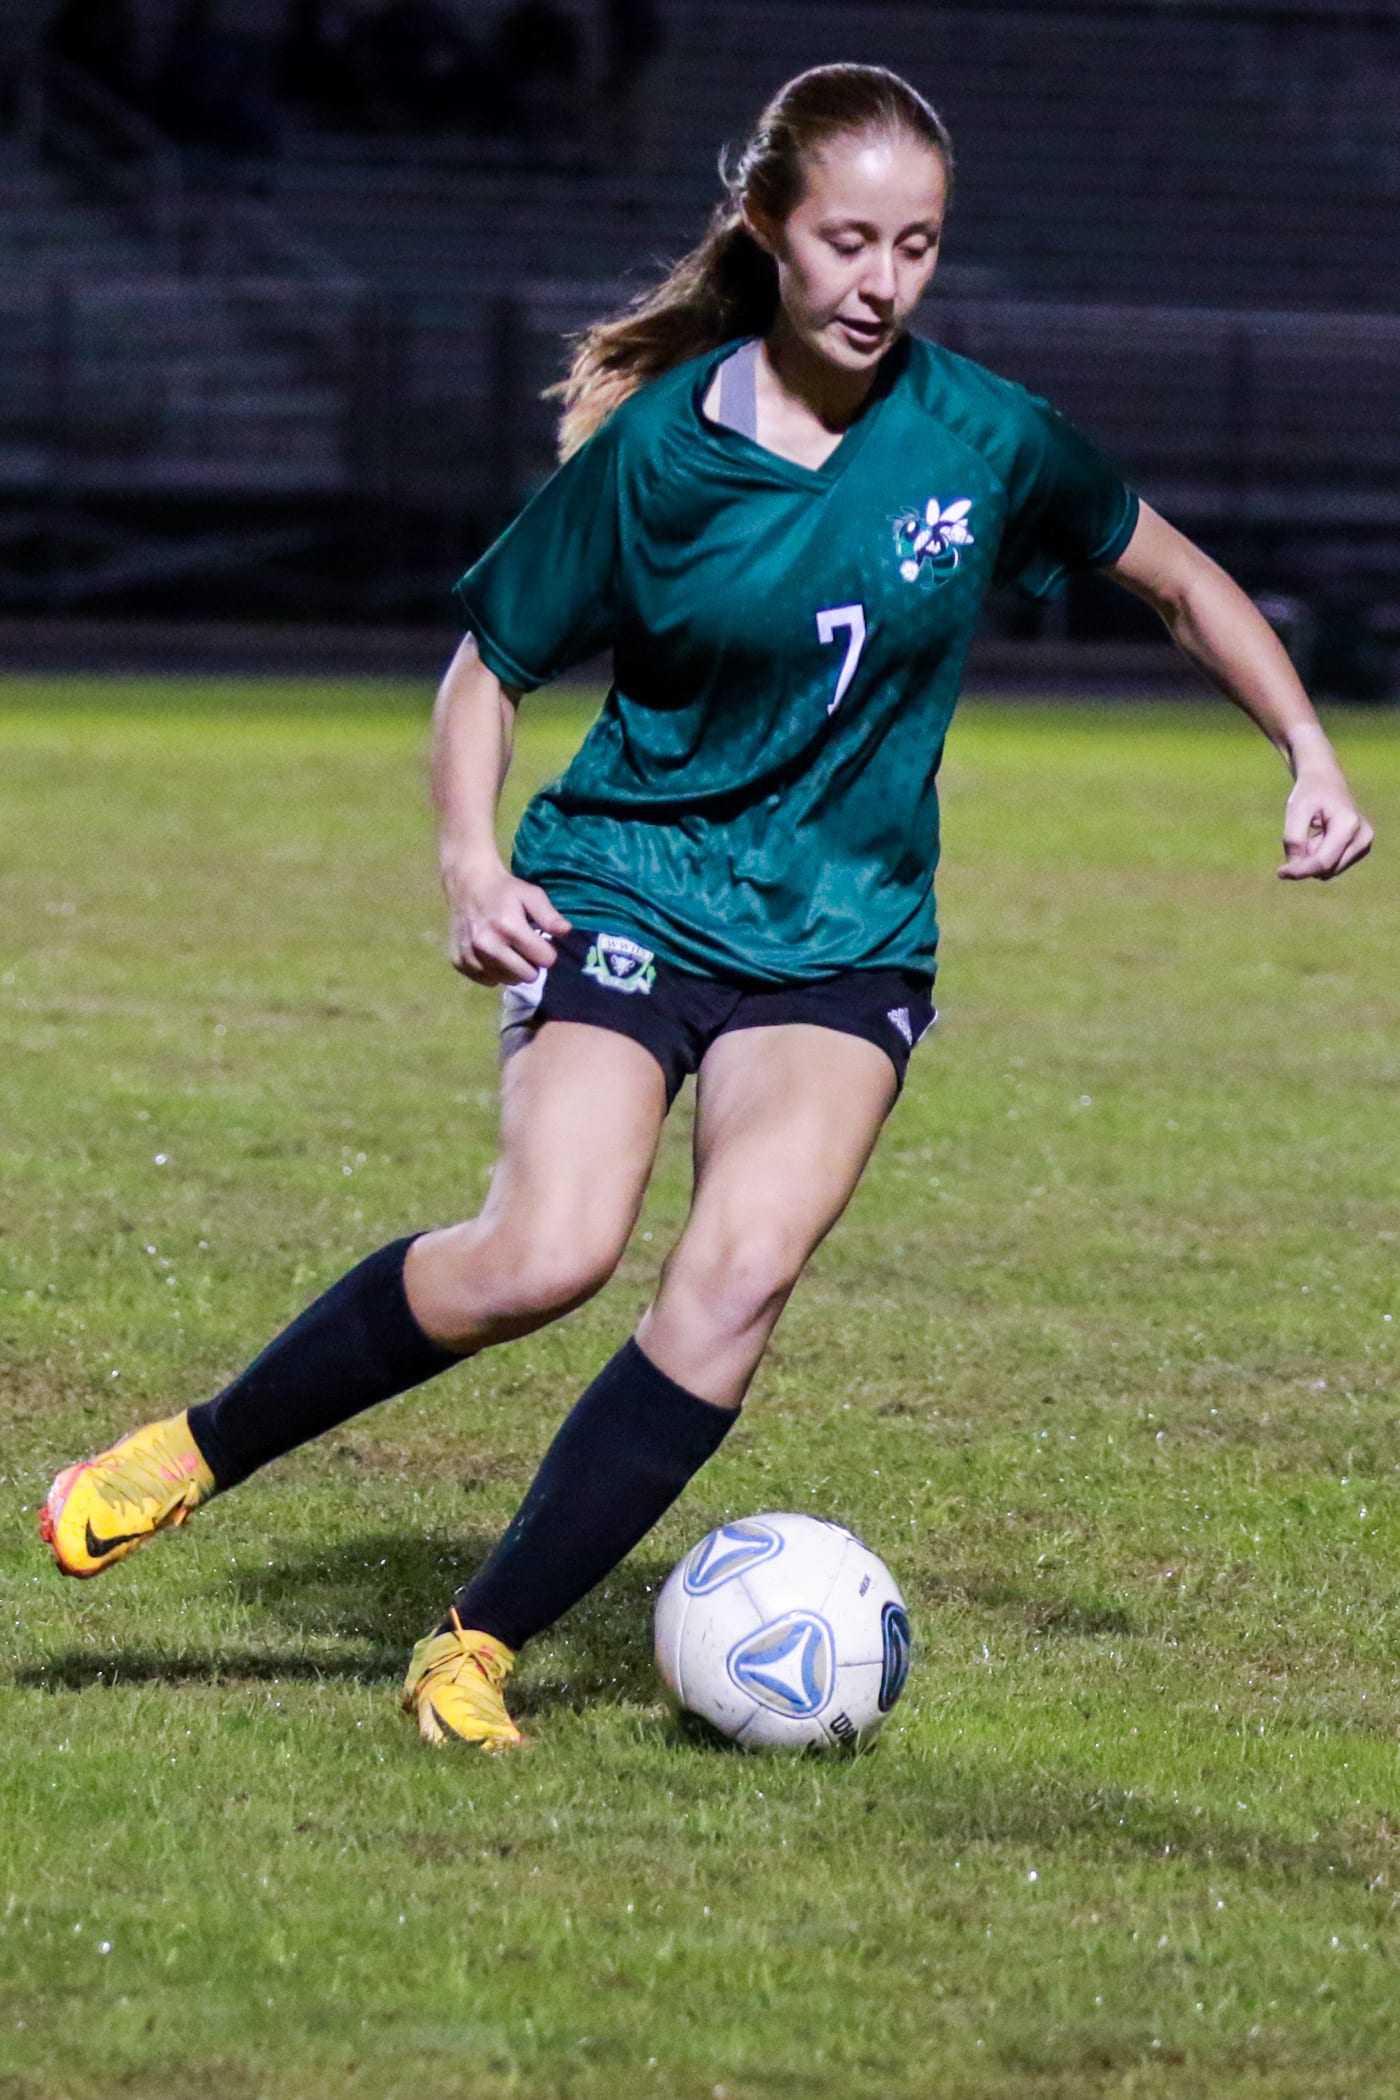 Weeki Wachee Hornet #7 takes the ball down field in Wednesday nights game against Citrus. Photo by Cheryl Clanton.